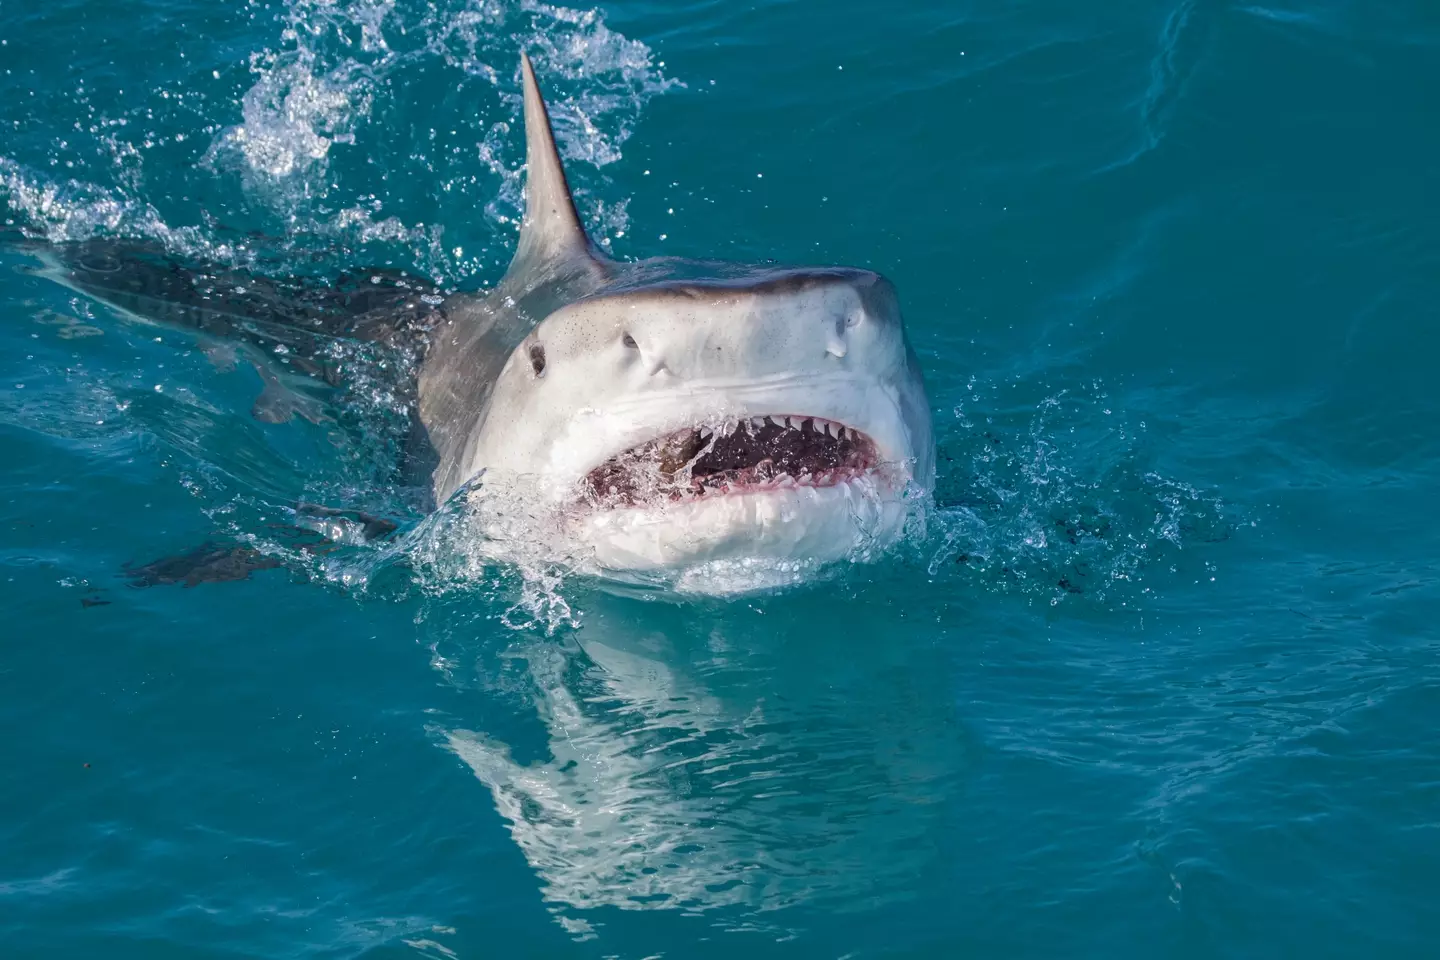 Tiger sharks are one of the most likely species of shark to attack humans.